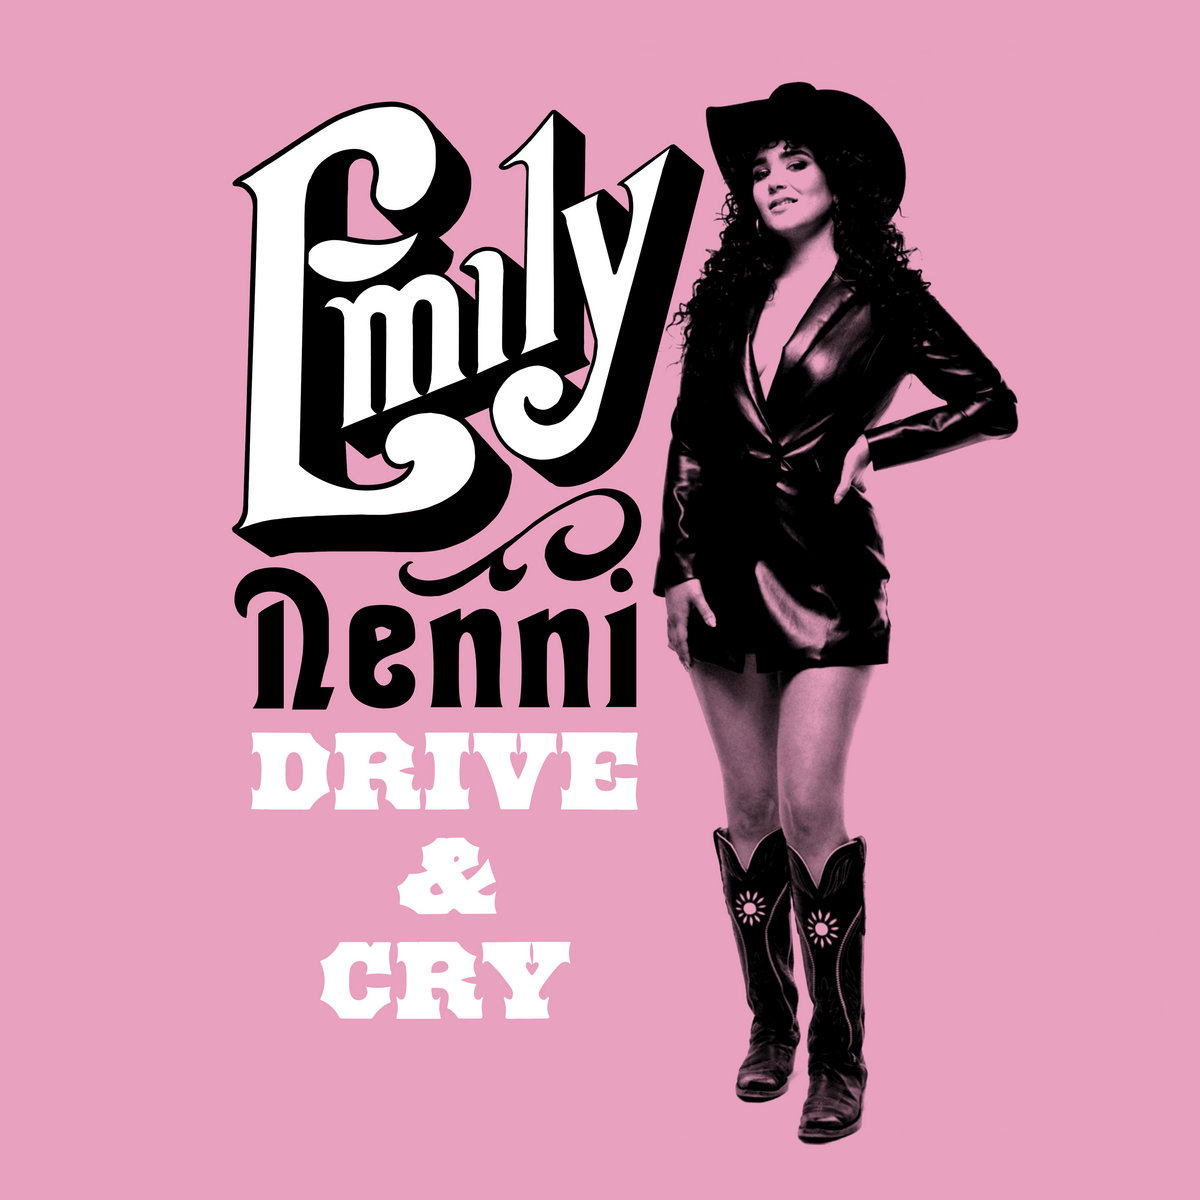 #nowplaying #latestrelease on @meridianfm ‘Get To Know Ya’ by @missemilynenni from her album new latest album “Drive & Cry” released on May 3. #countryradio #countrymusic #womenofcountry